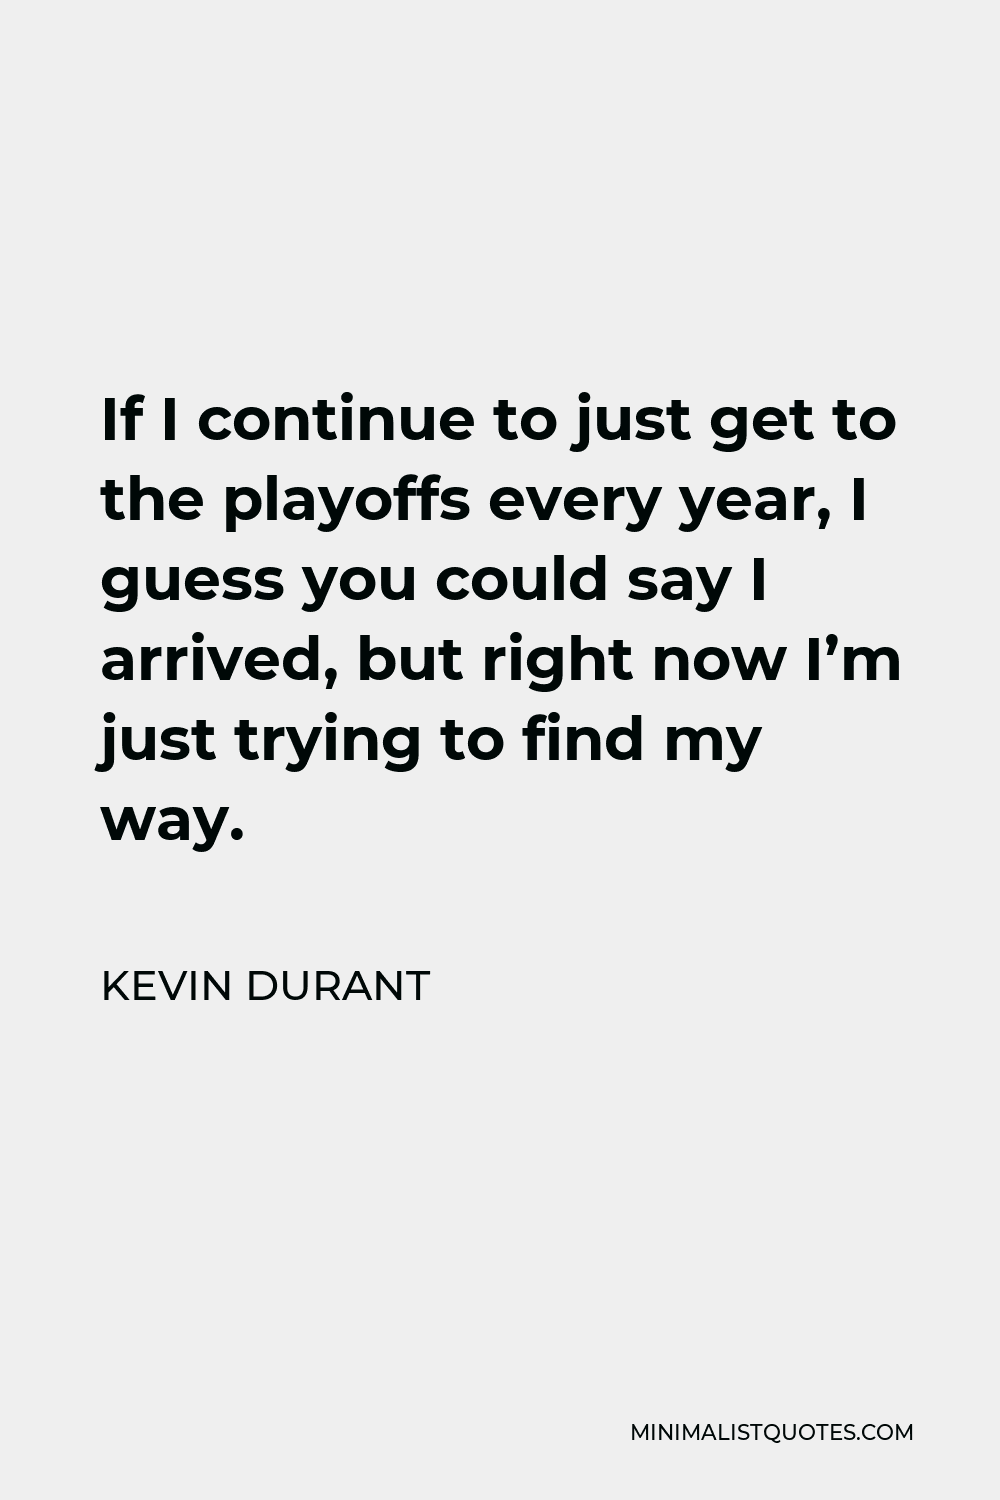 Kevin Durant Quote - If I continue to just get to the playoffs every year, I guess you could say I arrived, but right now I’m just trying to find my way.